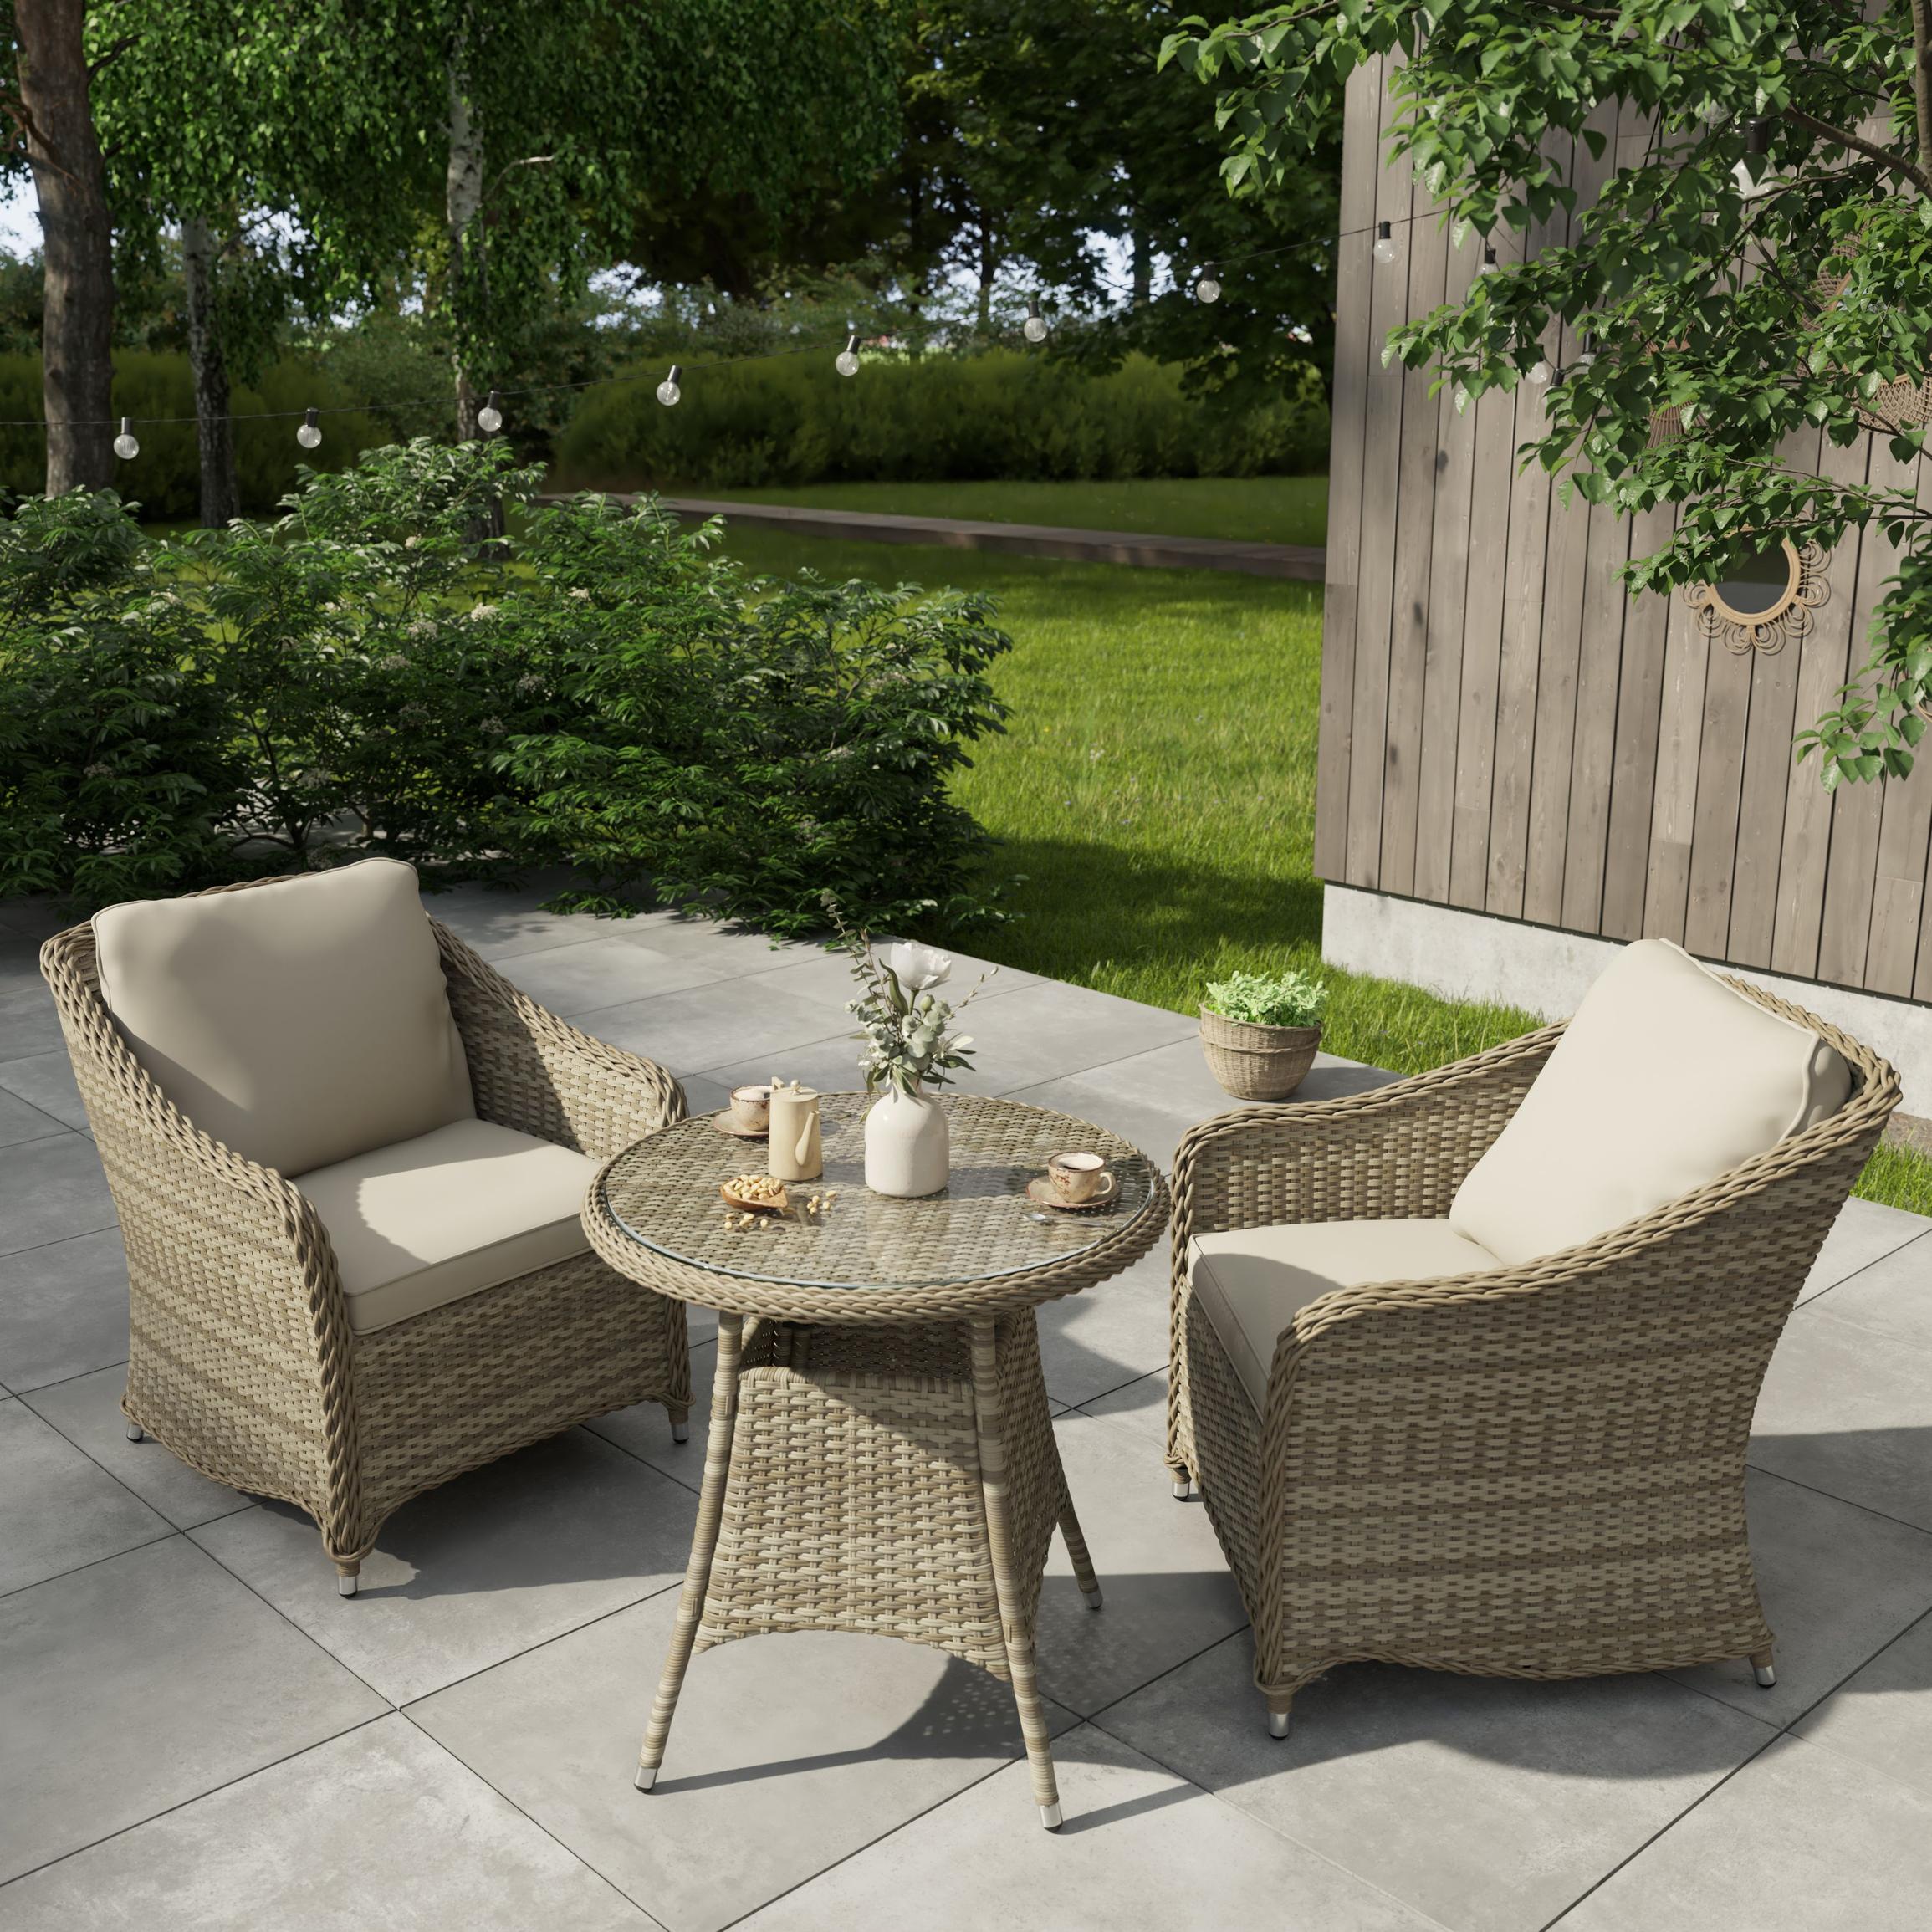 GoodHome Hamilton Cappuccino Rattan effect 2 seater Bistro set offers at £450 in B&Q